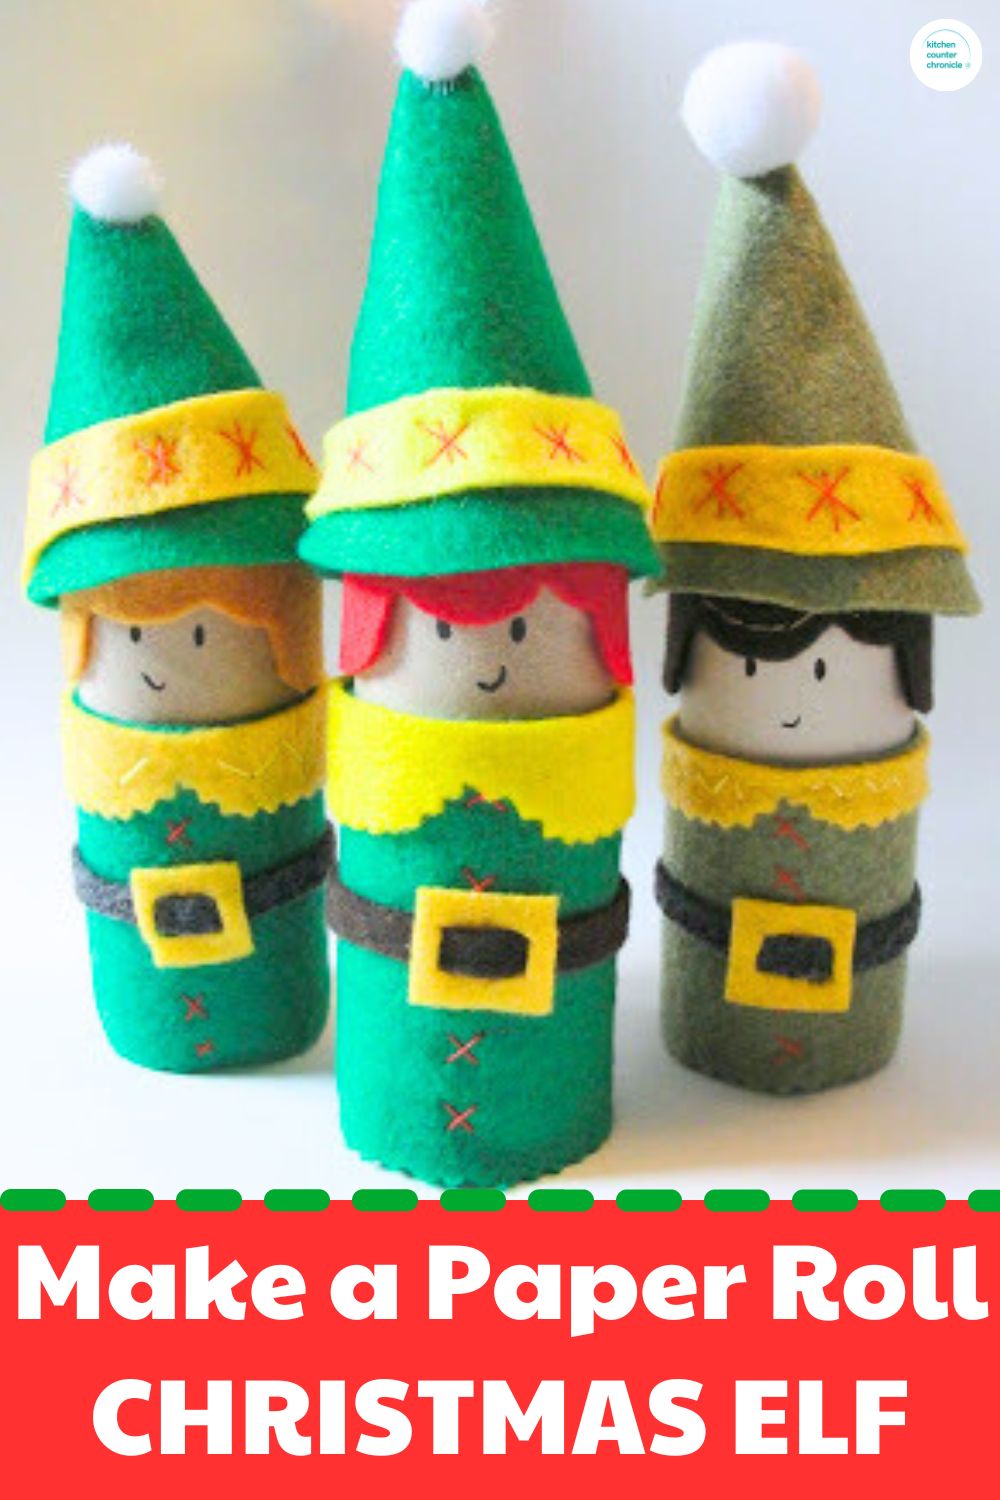 3 toilet paper roll elves with felt hats and clothes and title "Make a paper roll Christmas elf"